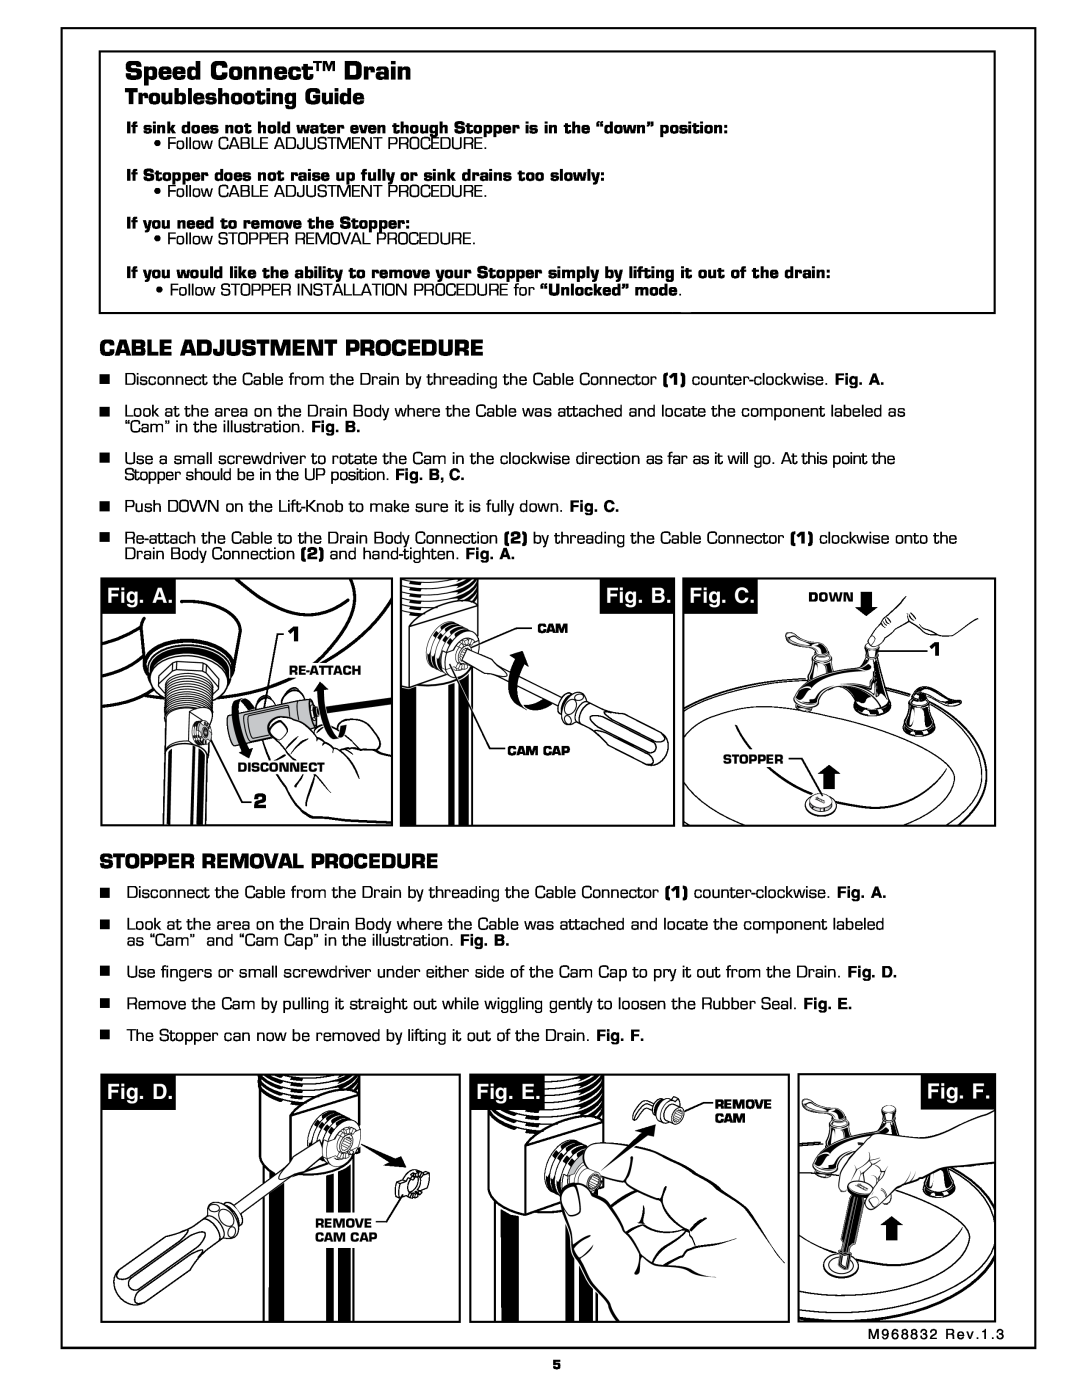 American Standard 4508.801 Troubleshooting Guide, Cable Adjustment Procedure, Fig. A, Fig. B, Fig. C, Fig. D, Fig. E 